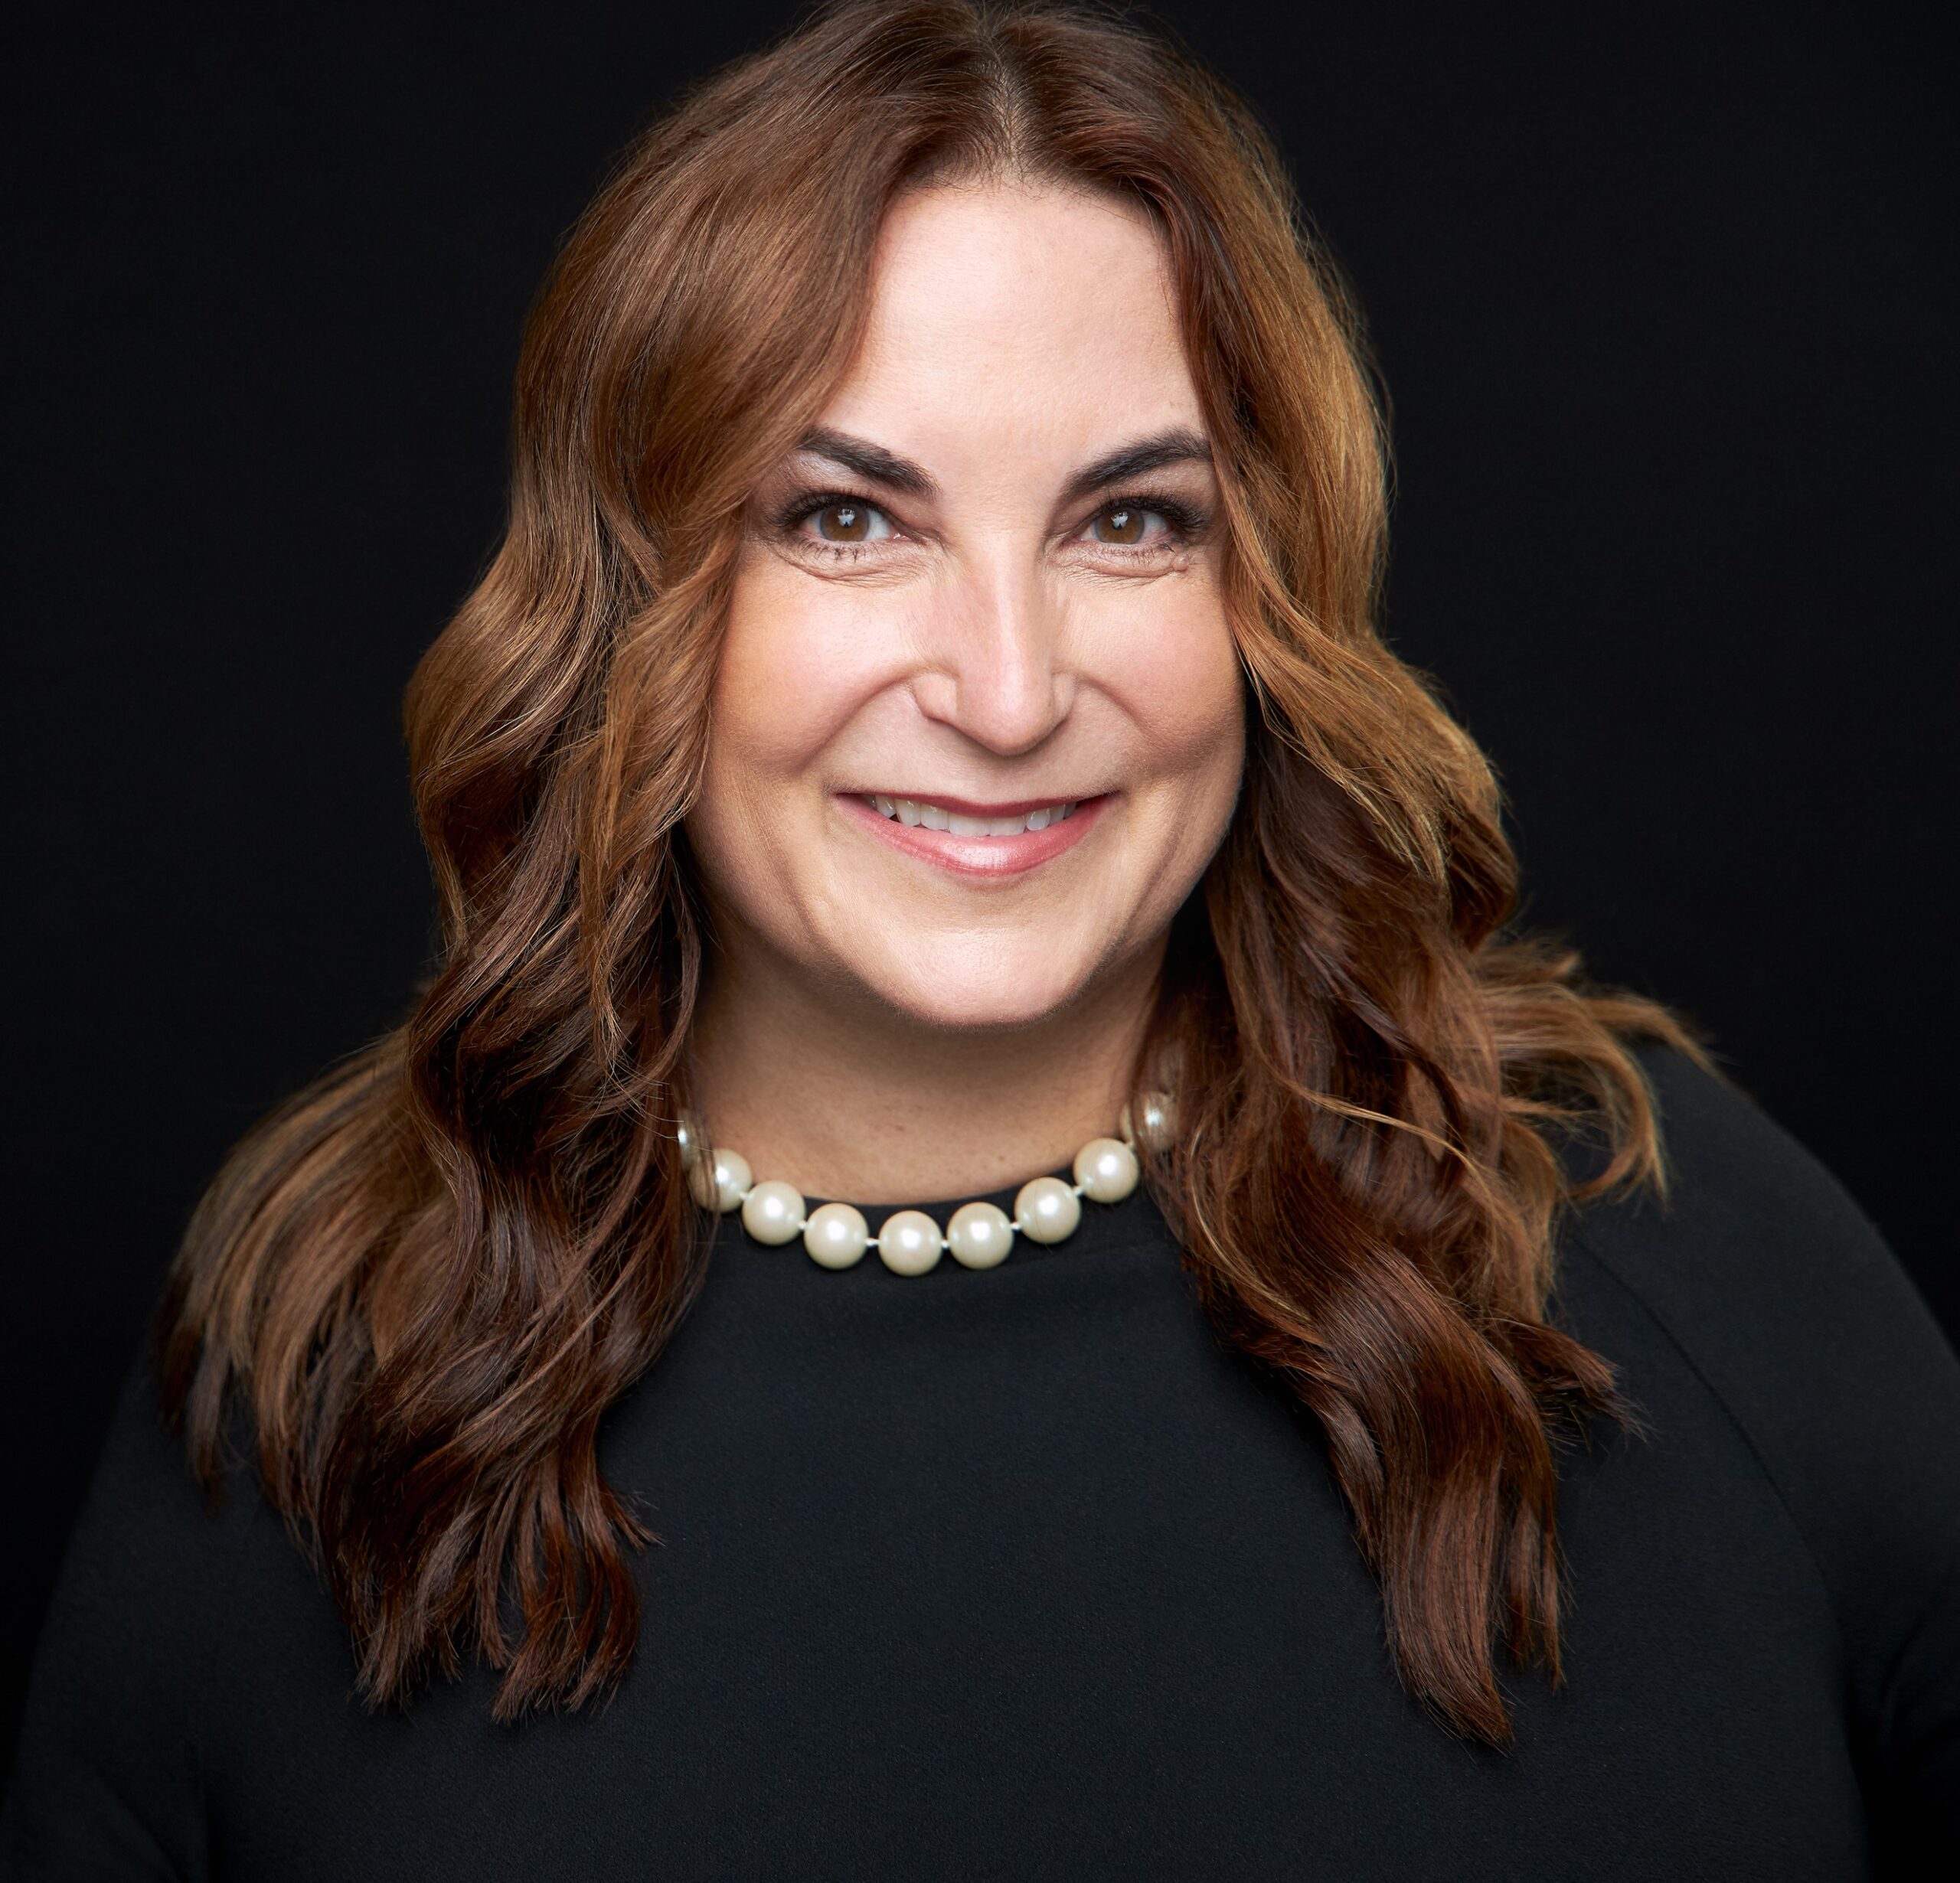 Sponsored: Sedgwick appoints Kimberly George as Global Chief Brand Officer